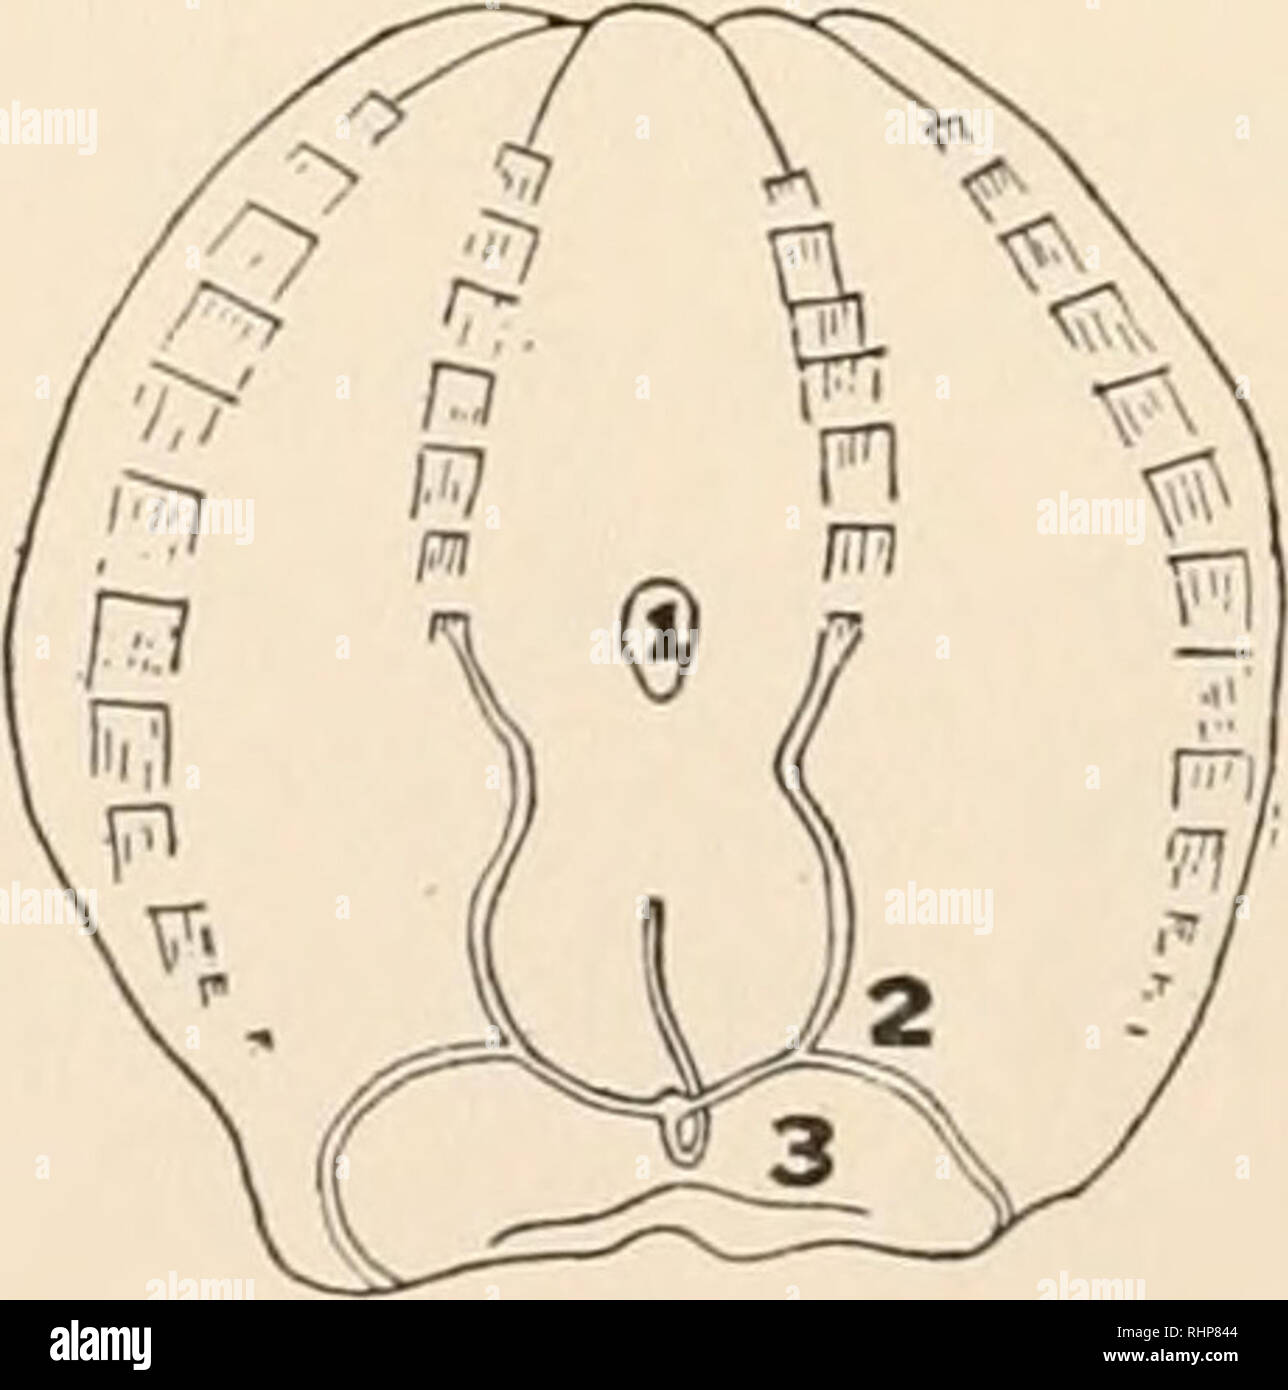 . The Biological bulletin. Biology; Zoology; Biology; Marine Biology. FIG. 7. Young Mnemiopsis Icidyi, 2 mm. high. i. Branching tentacle, partially contracted. 2. Paragastric canals, only unbranched terminations shown. 3. Mouth.  The 8 mm. specimens are much further advanced, Fig. 9. The auricles are now forming, and the tentacular ridge has appeared as a slight fold or line as shown, but it is not connected to the tentacular bulb, and possesses no tentacles. It was observed that tentacles never appeared along the tentacular ridge until it had joined the tentacular bulb.. FK;. 8. Young Mnemio Stock Photo